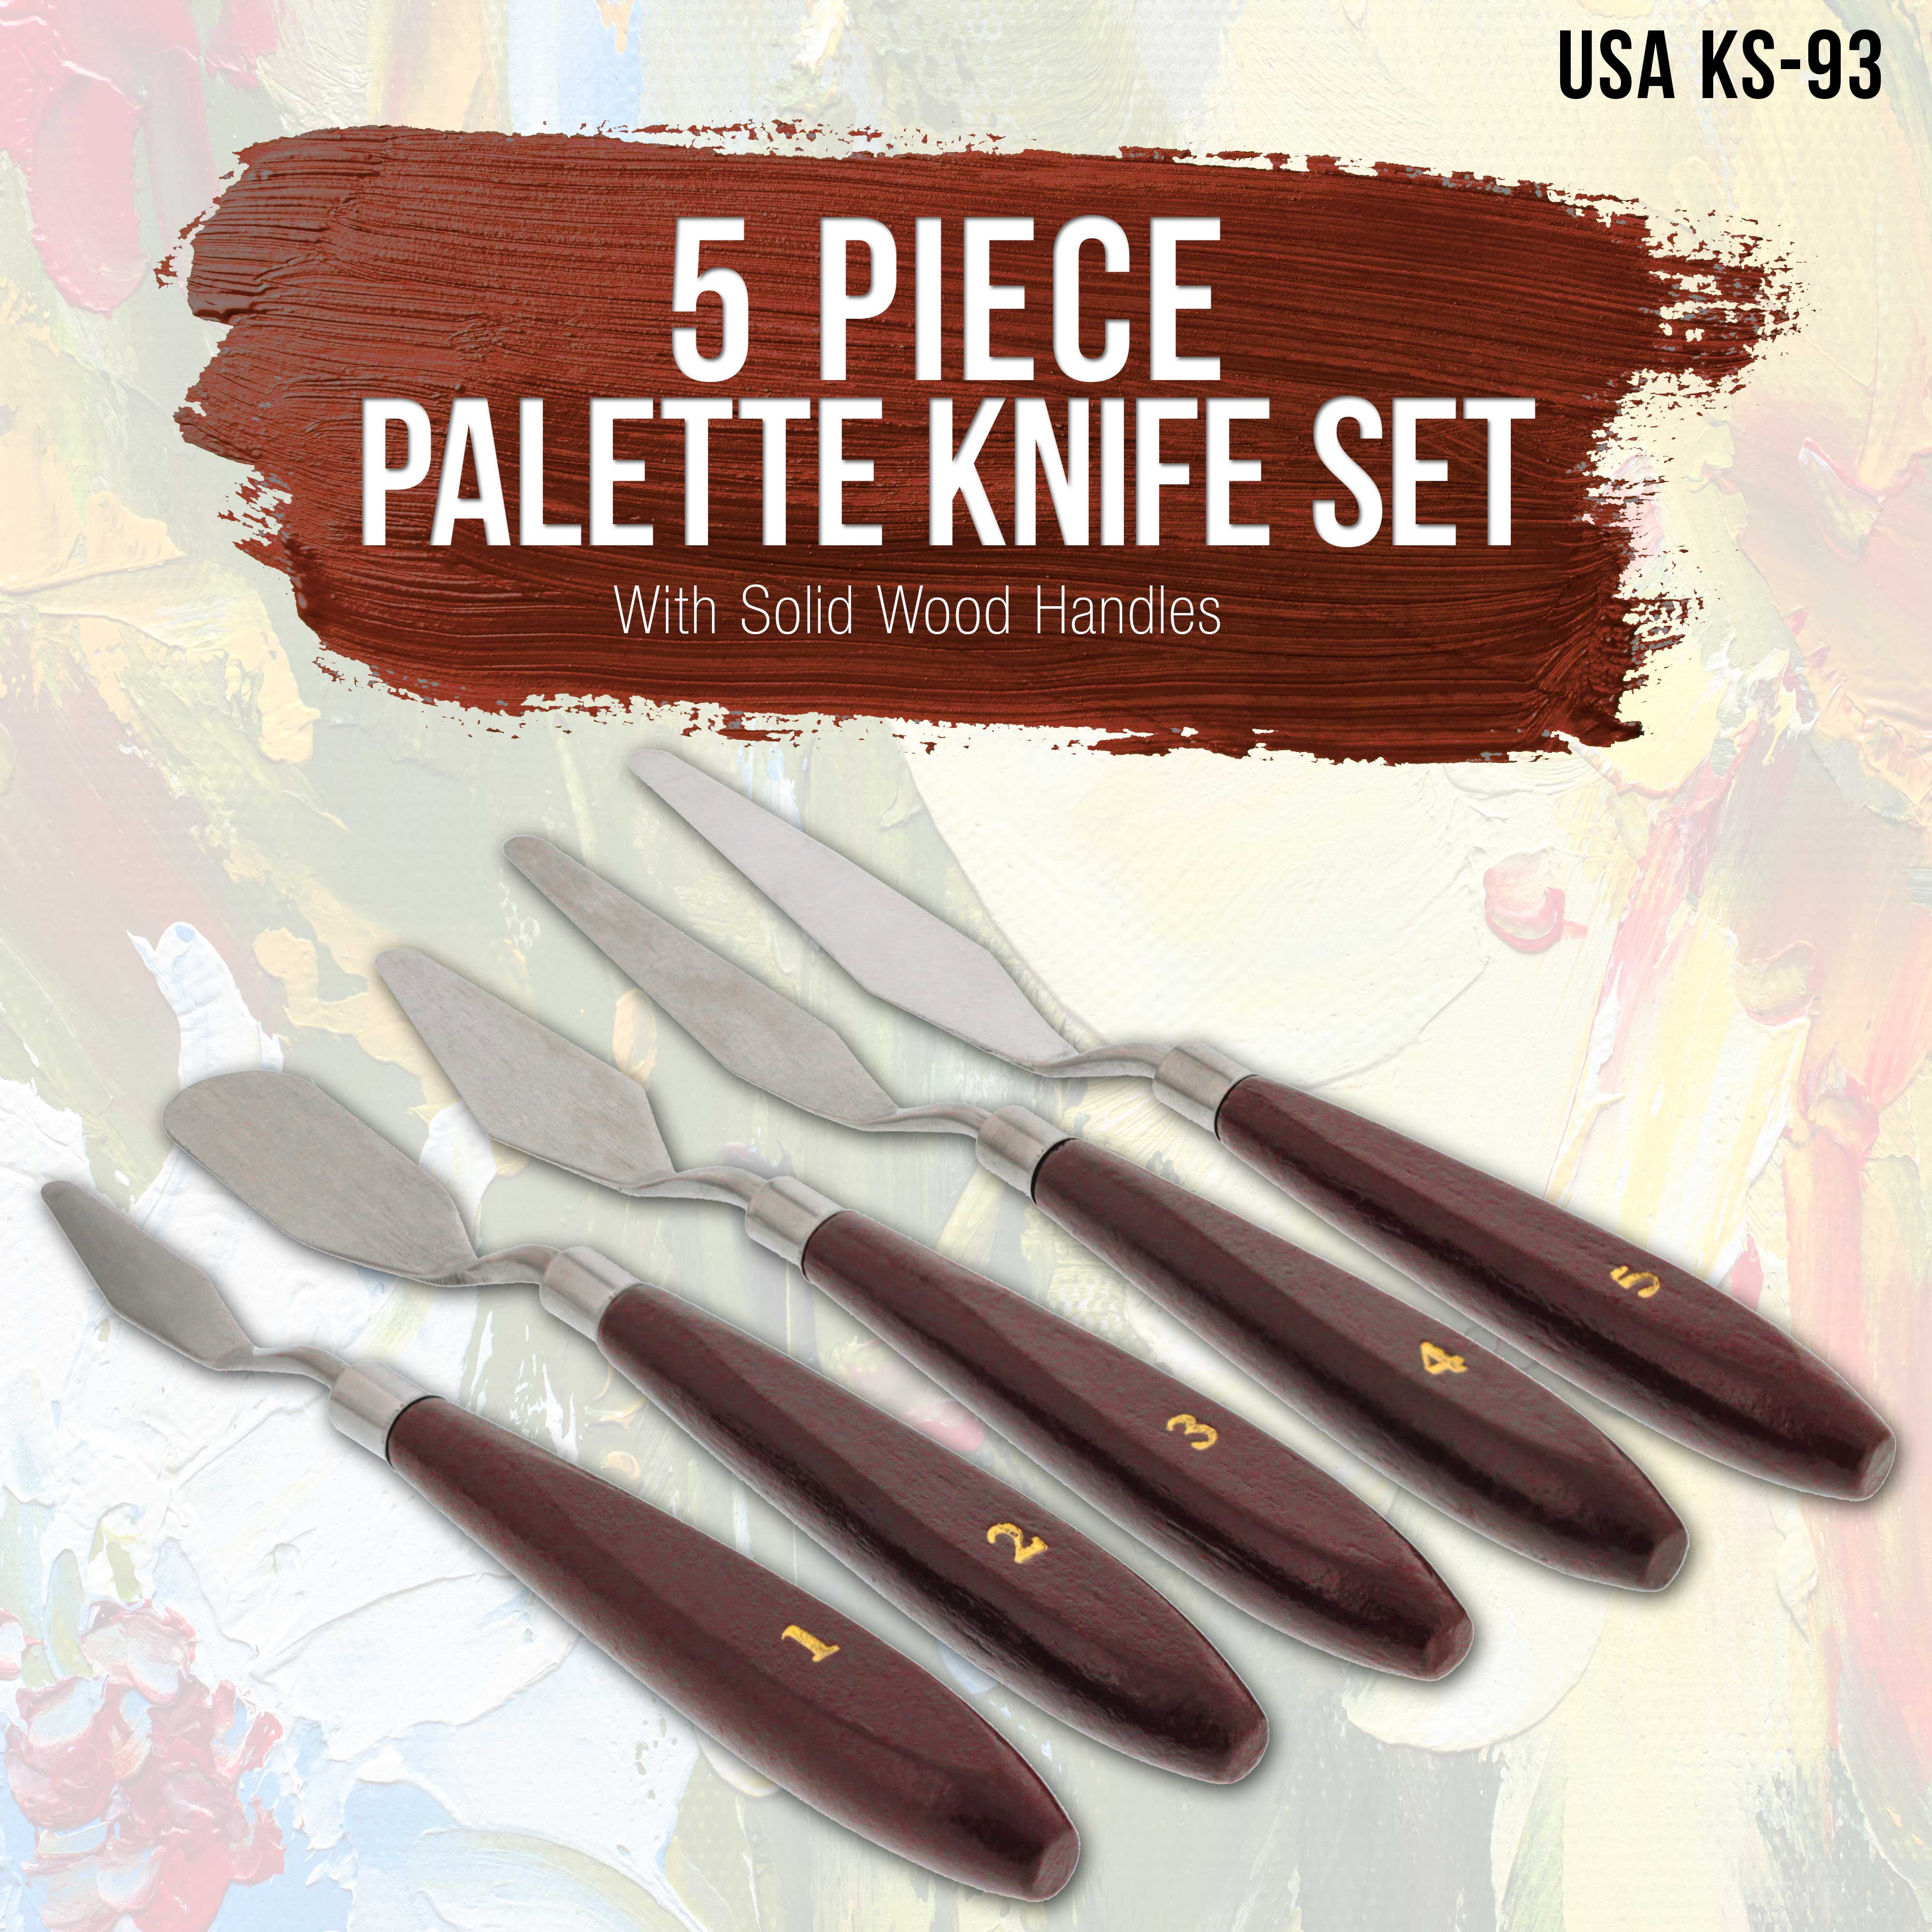 5 Piece Oil Painting Palette Knife Set Canvas Painting Artist Knives for  Use With Oil Based & Acrylic Paints Create Textures and Effects 